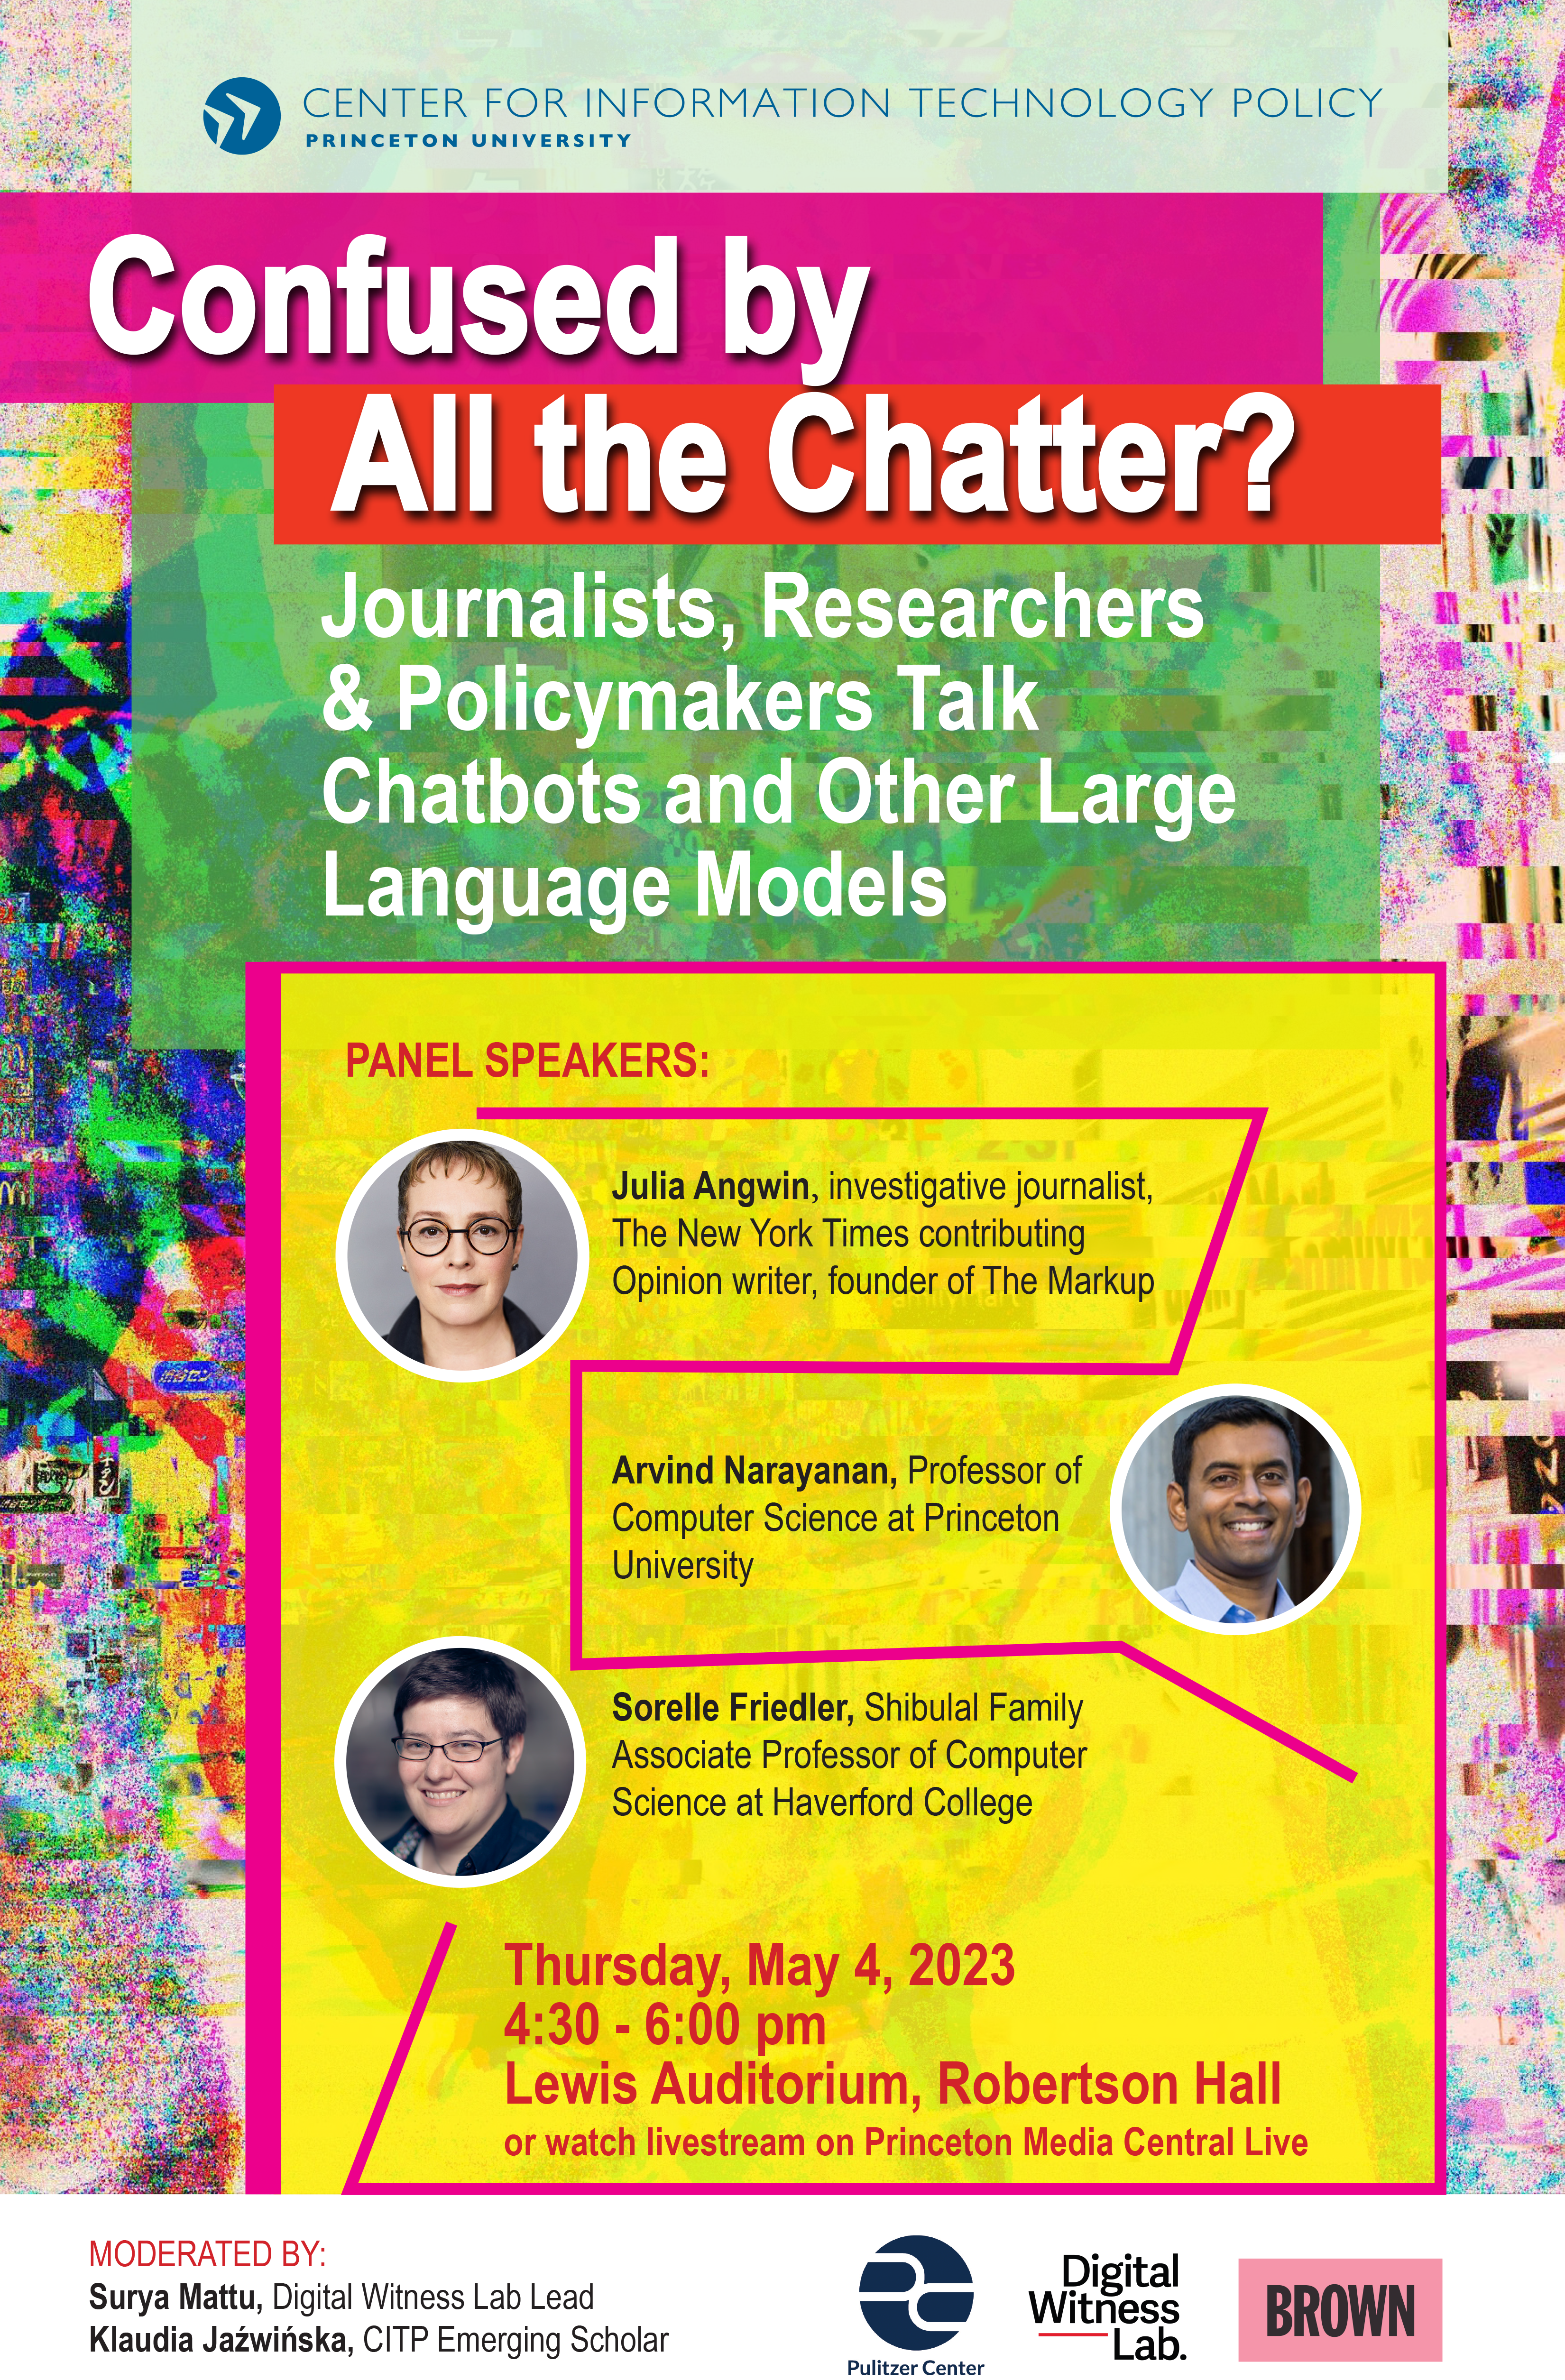 Colorful Confused by All the Chatter poster